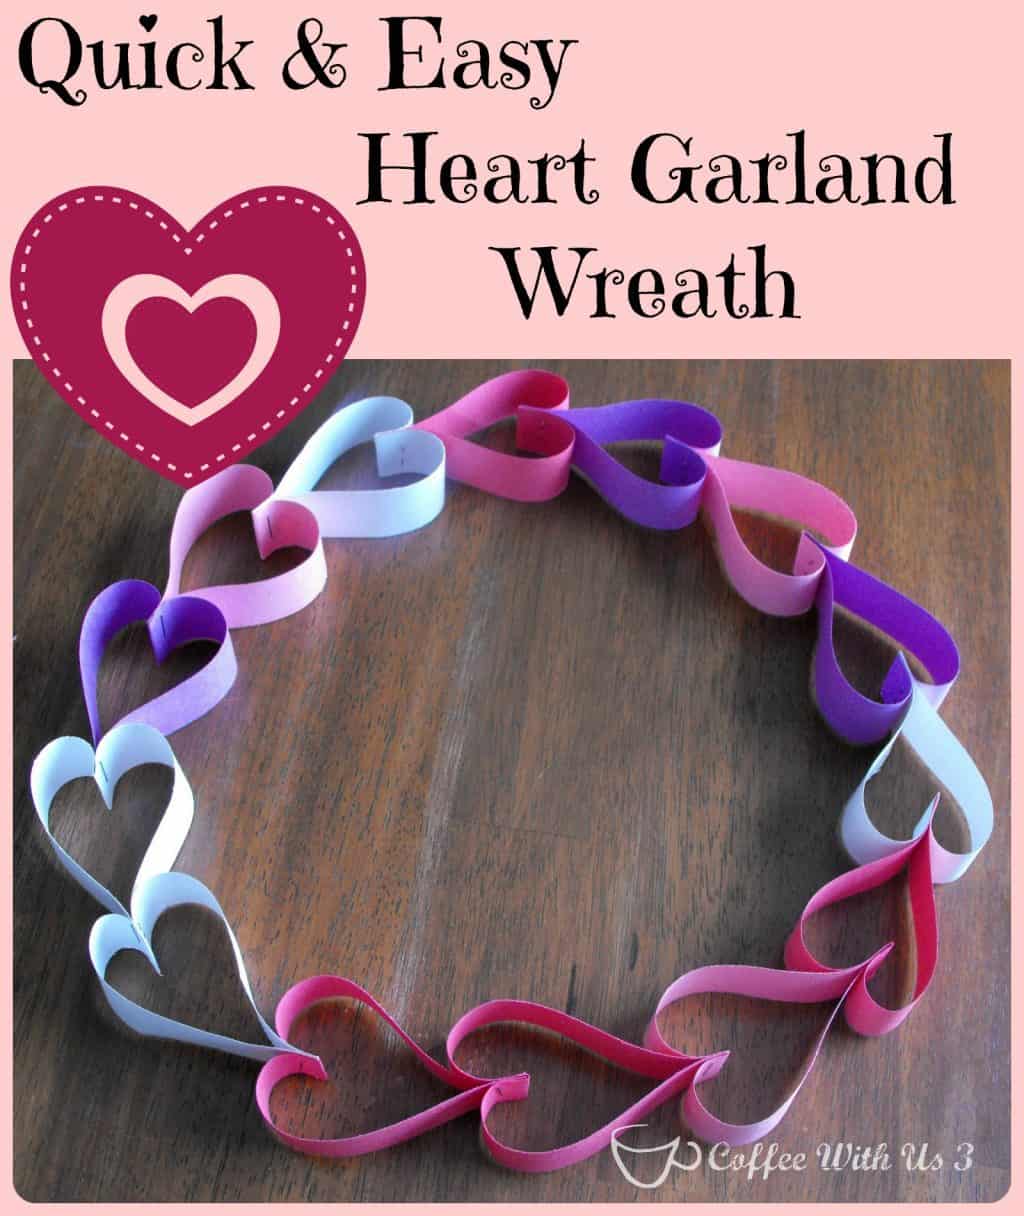 Paper Heart Garland Wreath: Quick and Easy